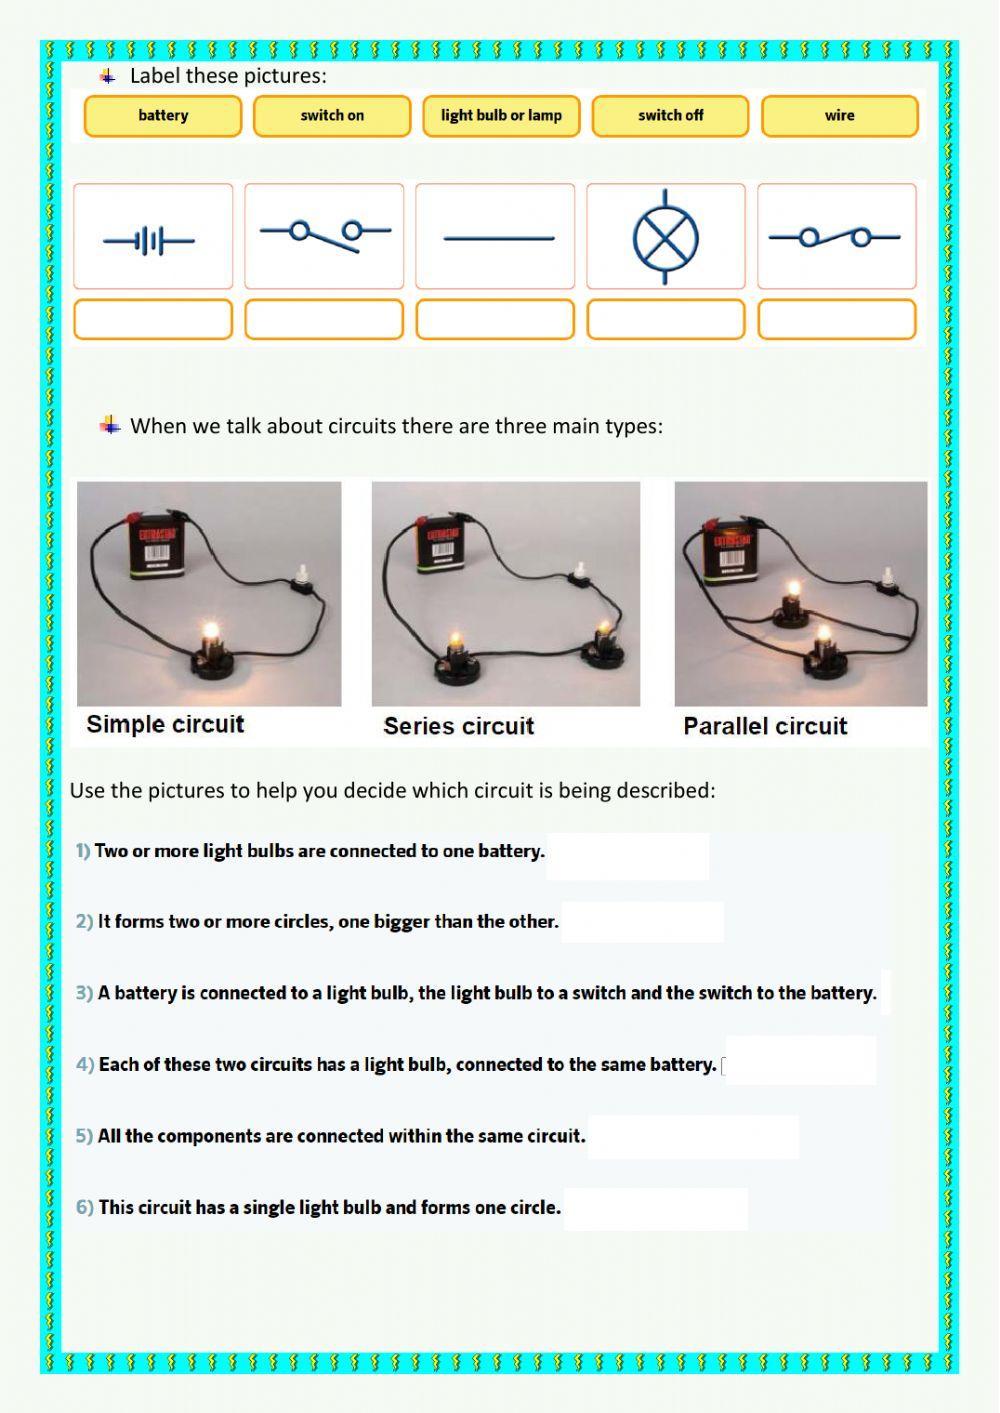 Electricity and inventions test